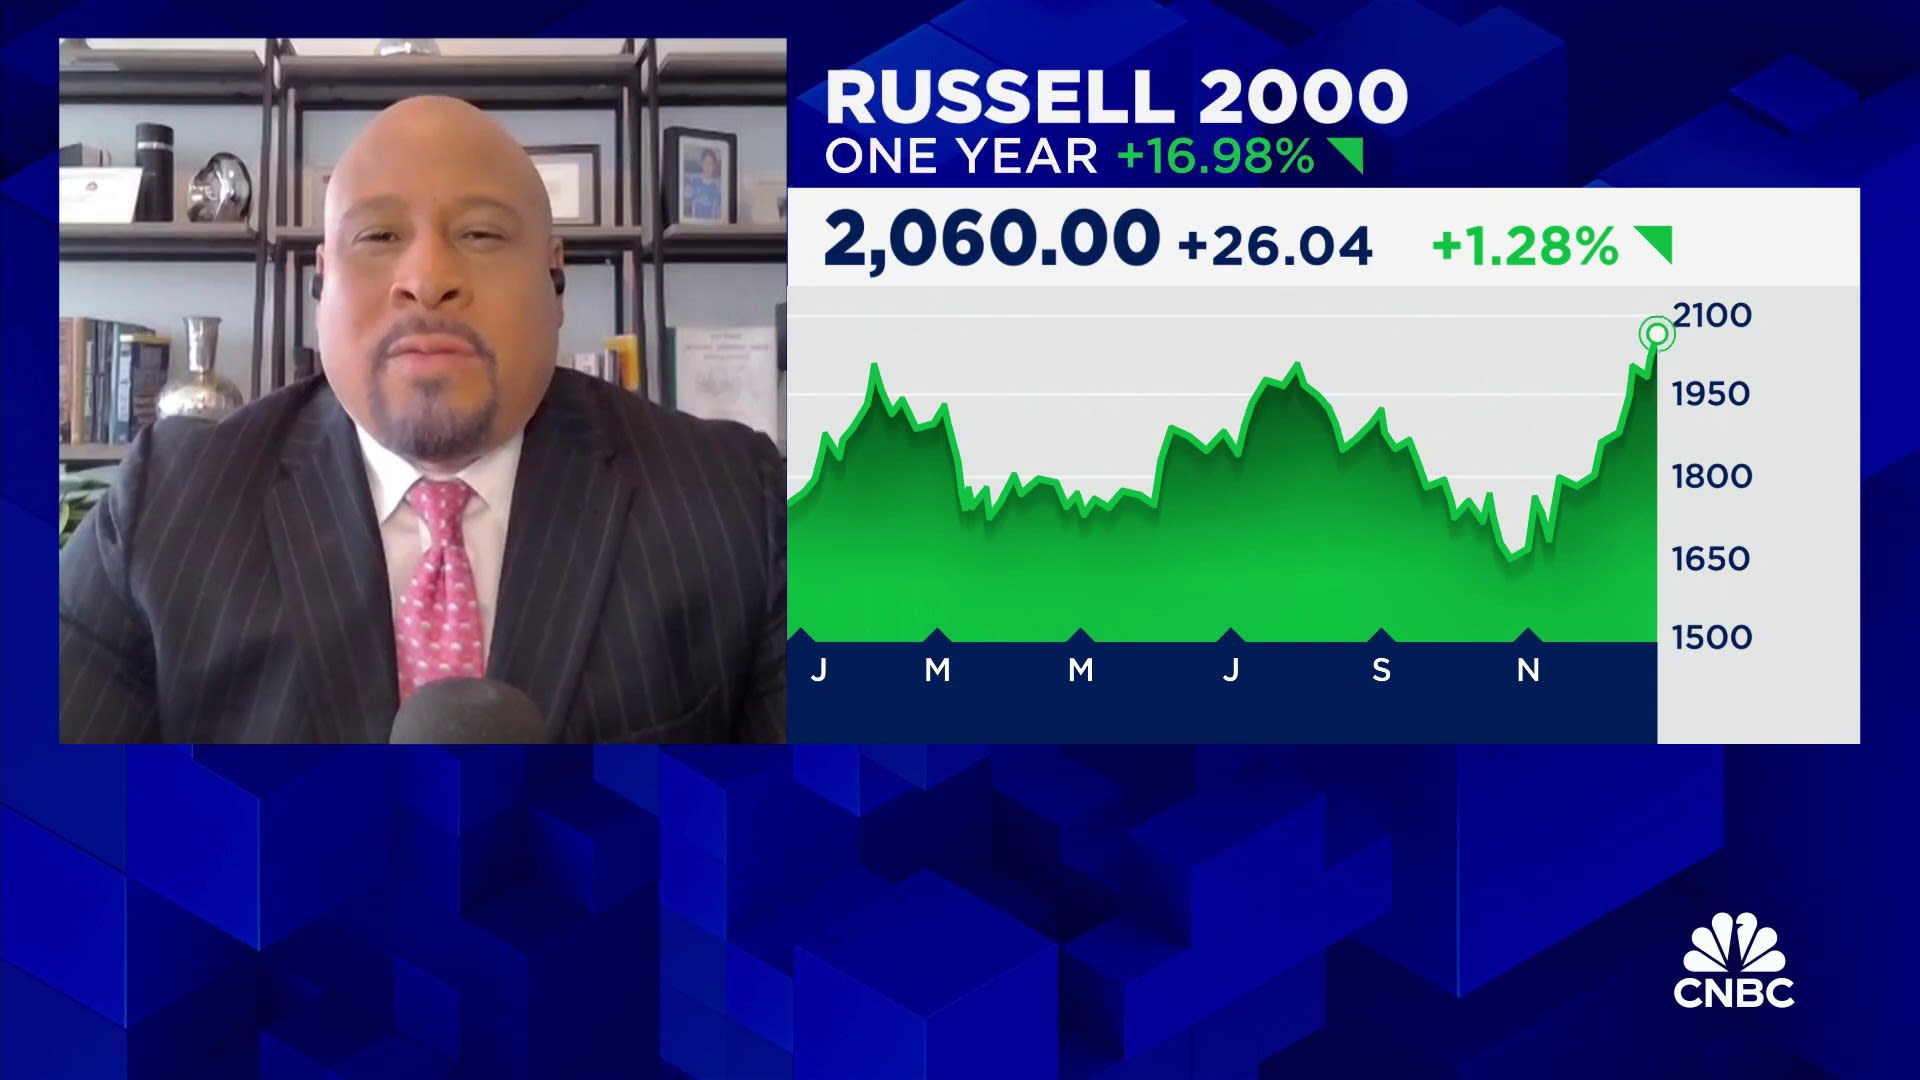 The market rally will continue to run, says Veritas Financial's Greg Branch